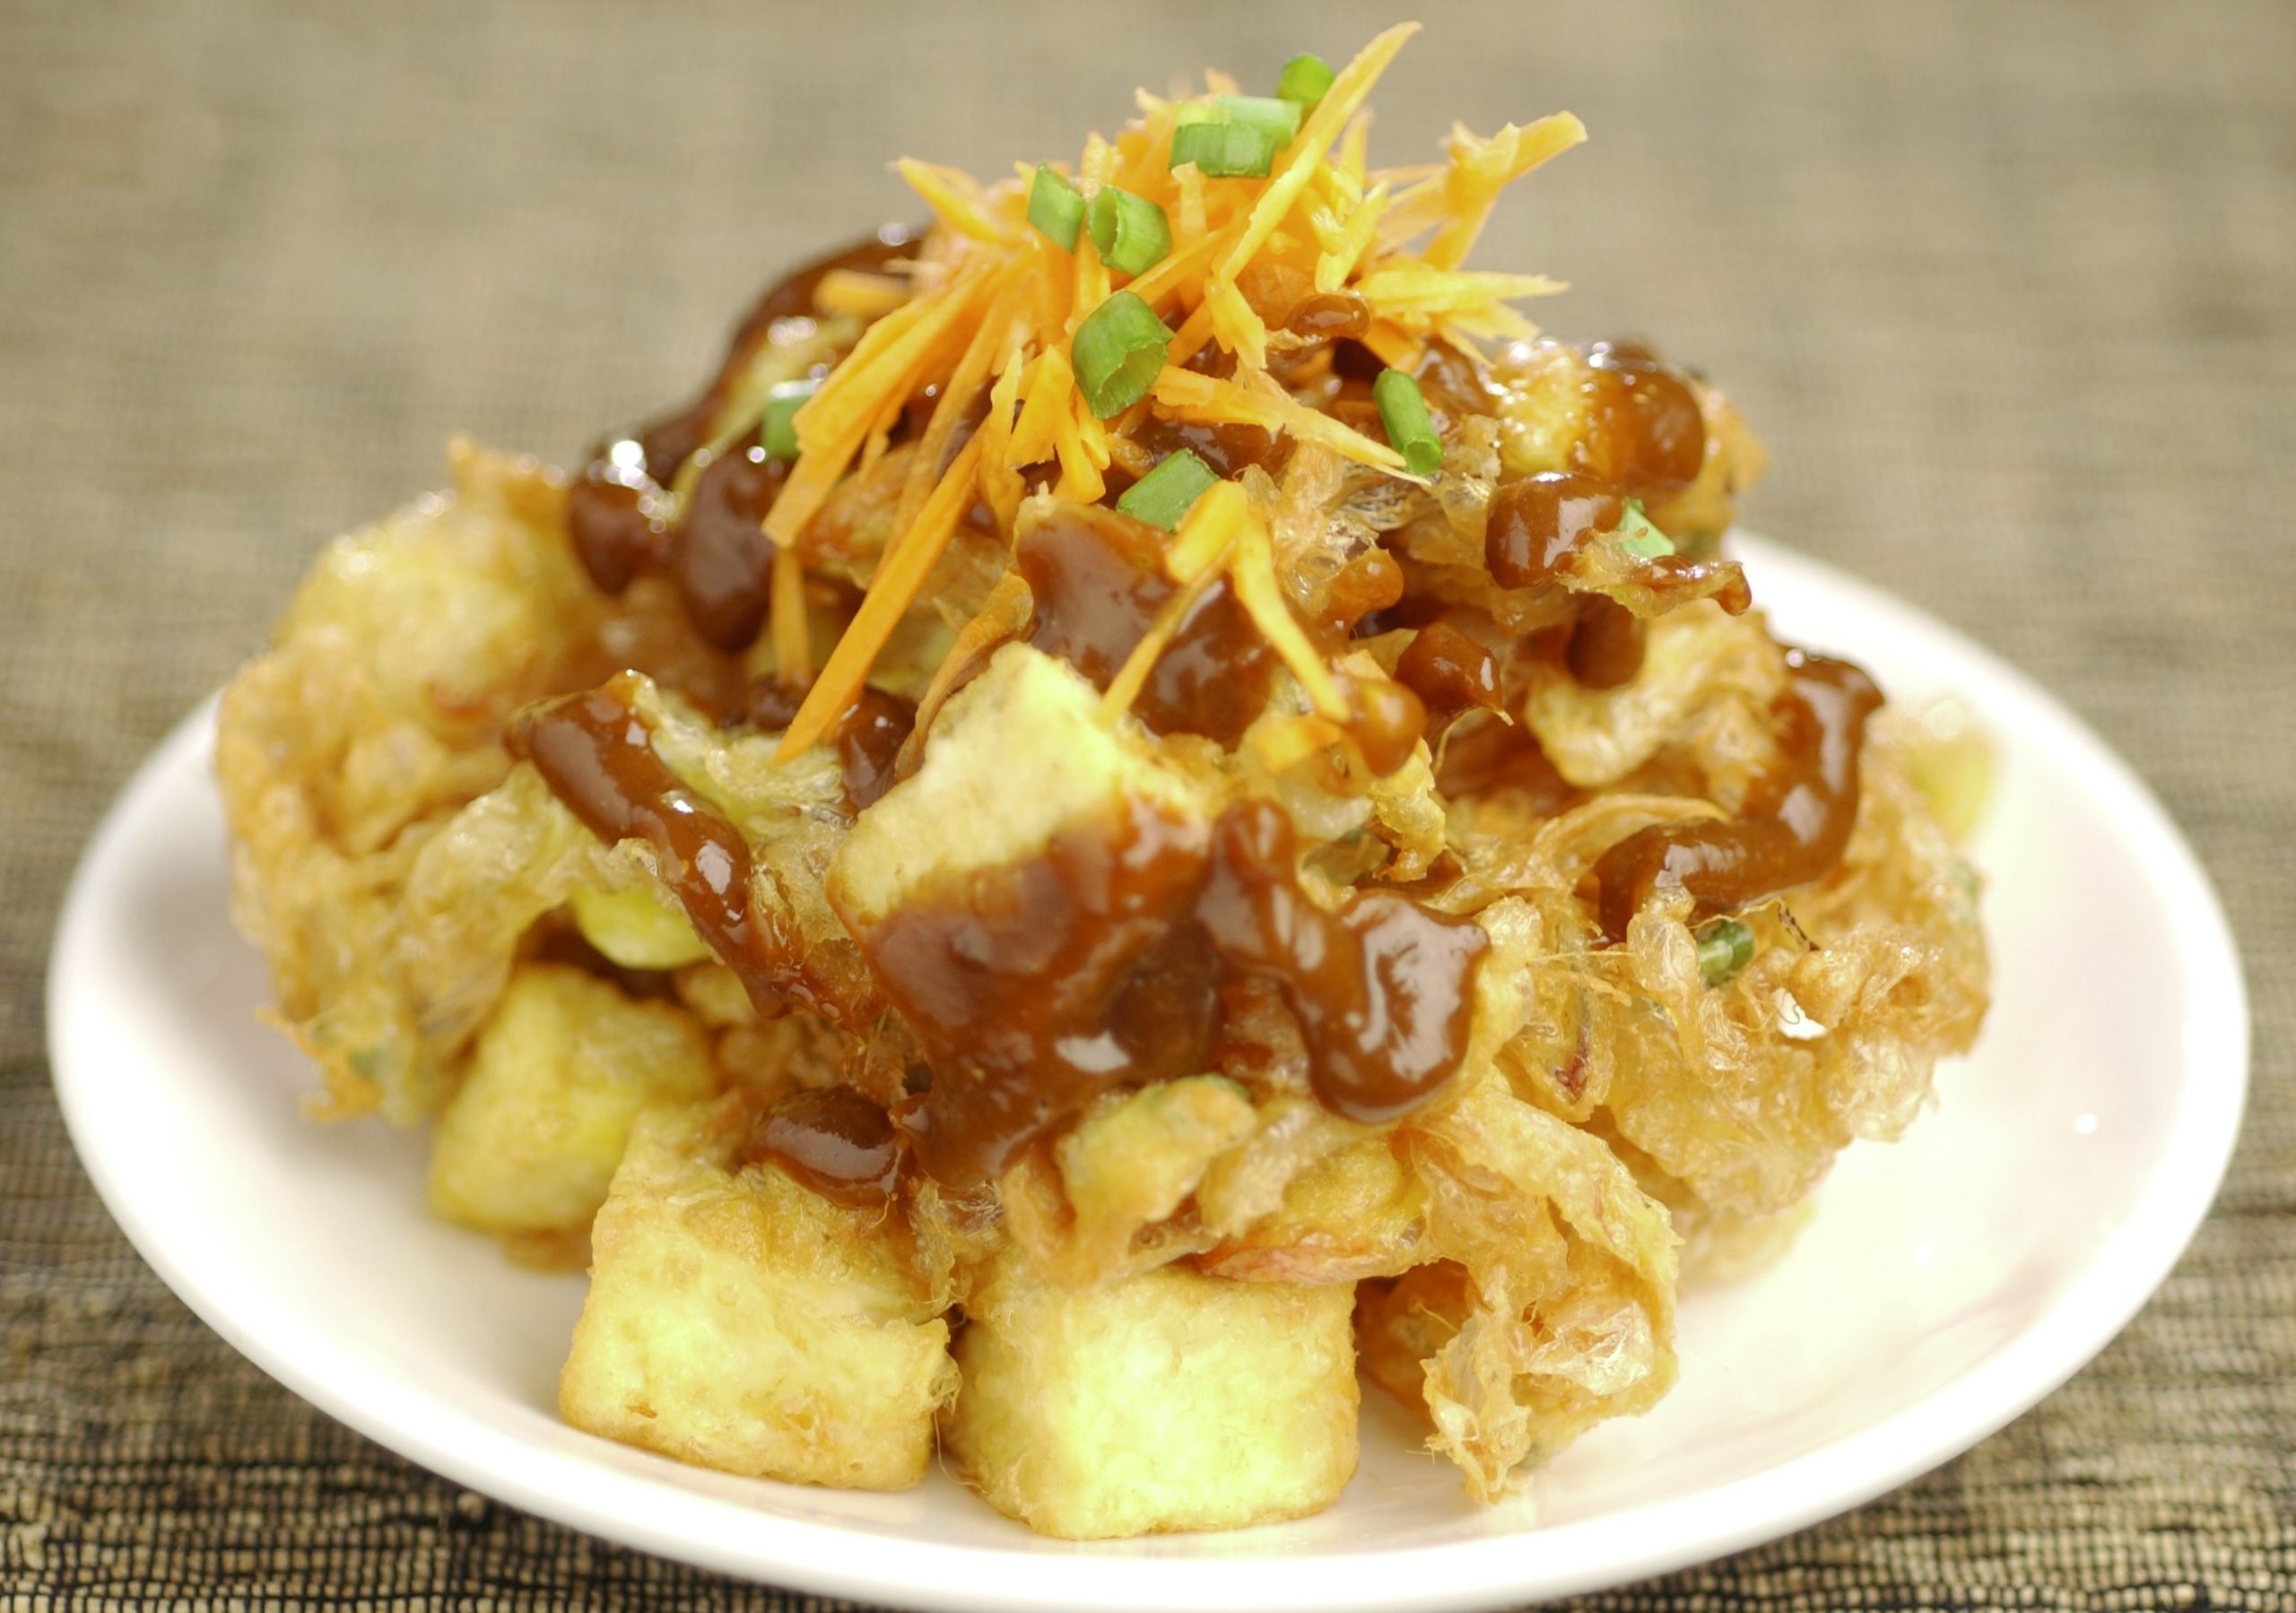 Tahu telor (fried beancurd with eggs) is one of The Rice Table's signature dishes. Sih co-created the menu with his head chef and can cook every dish offered in the restaurant.